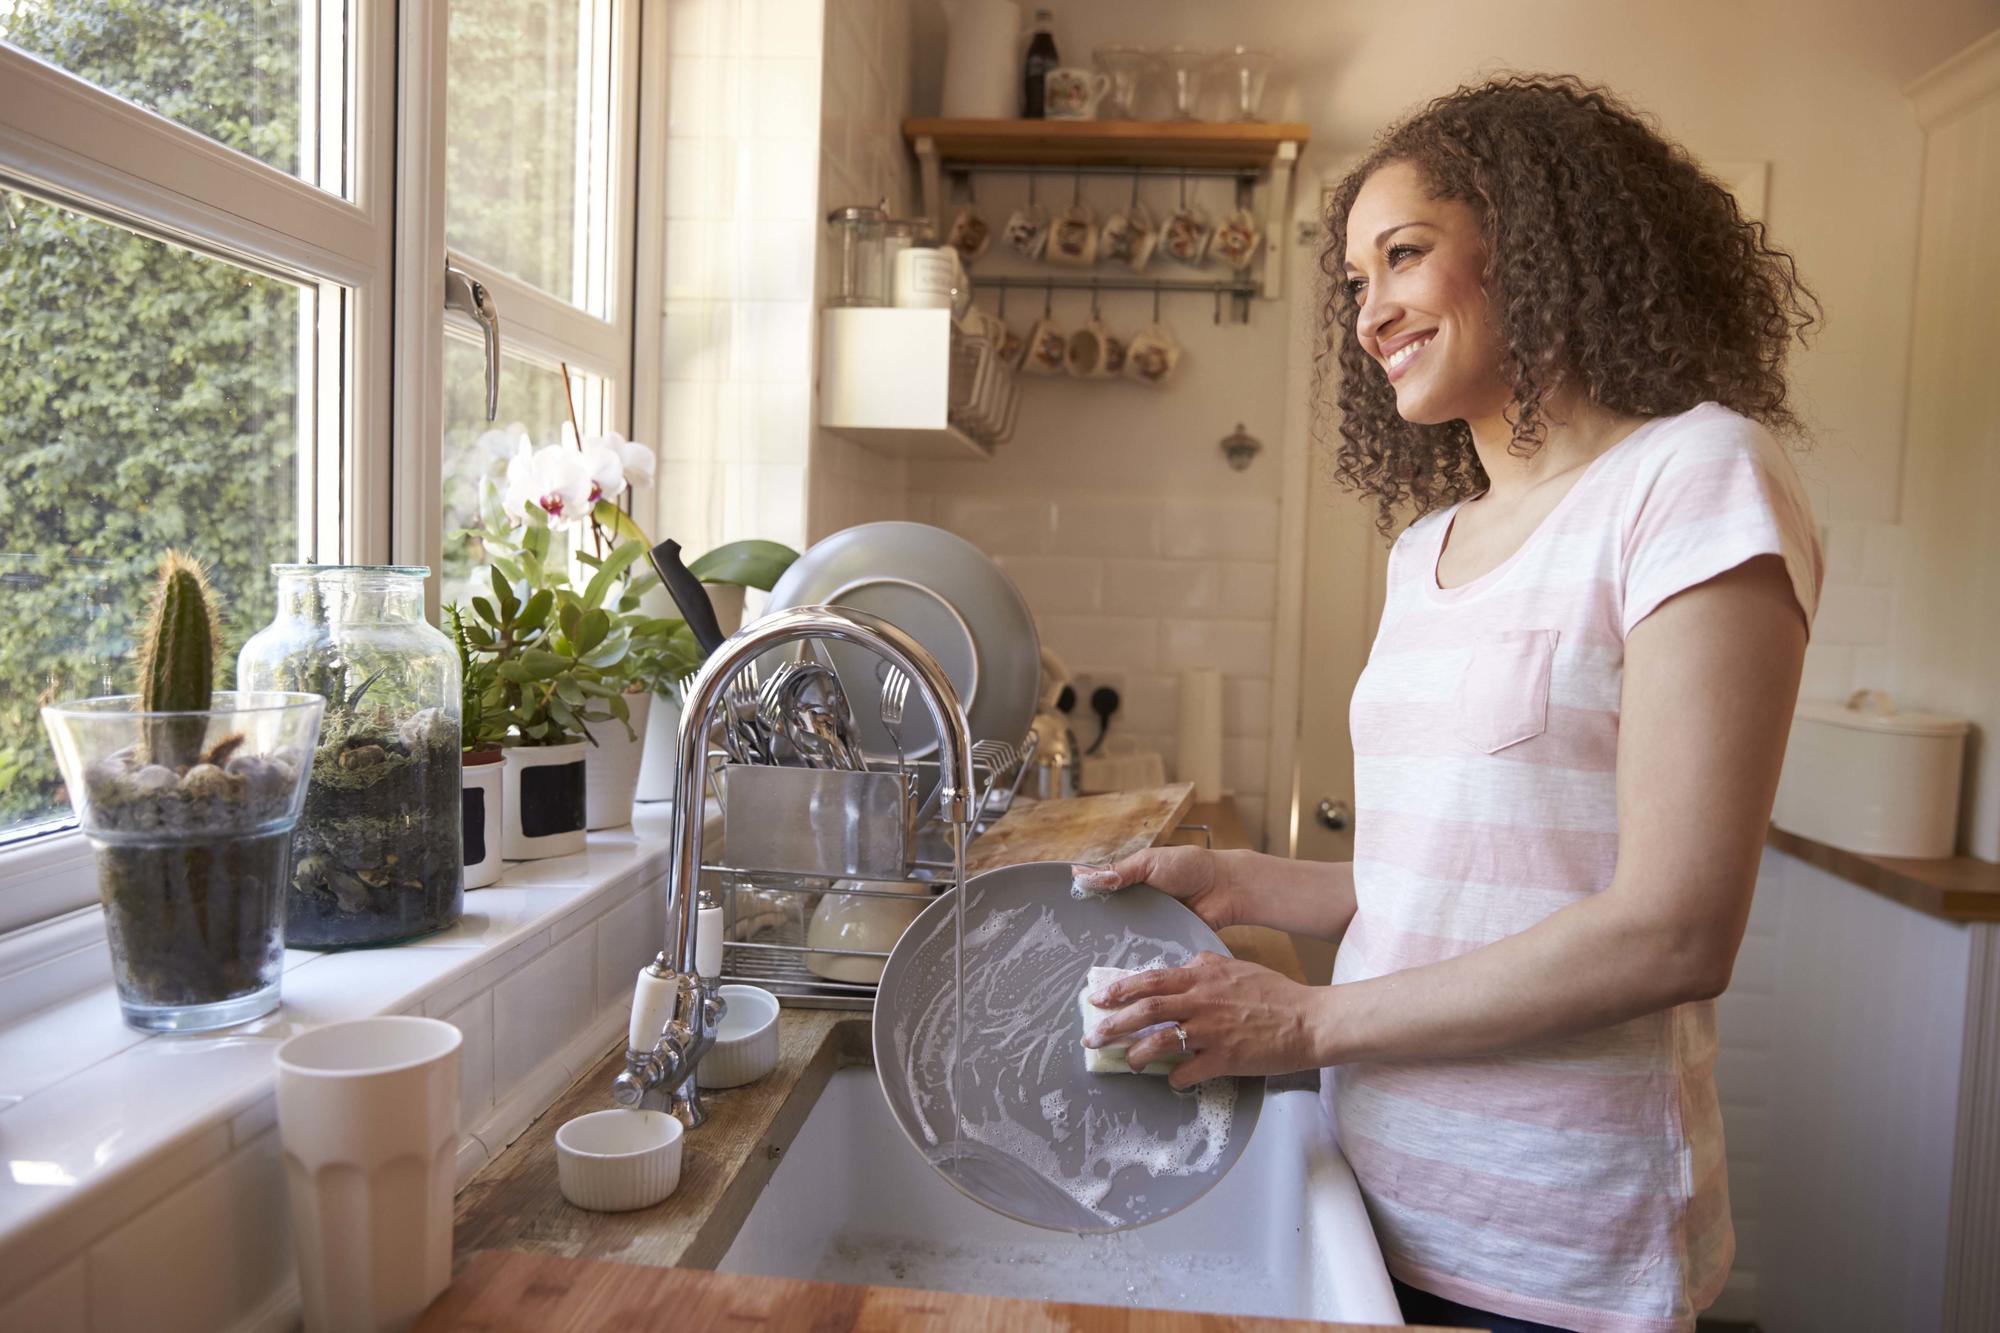 woman washing dishes in kitchen facing window